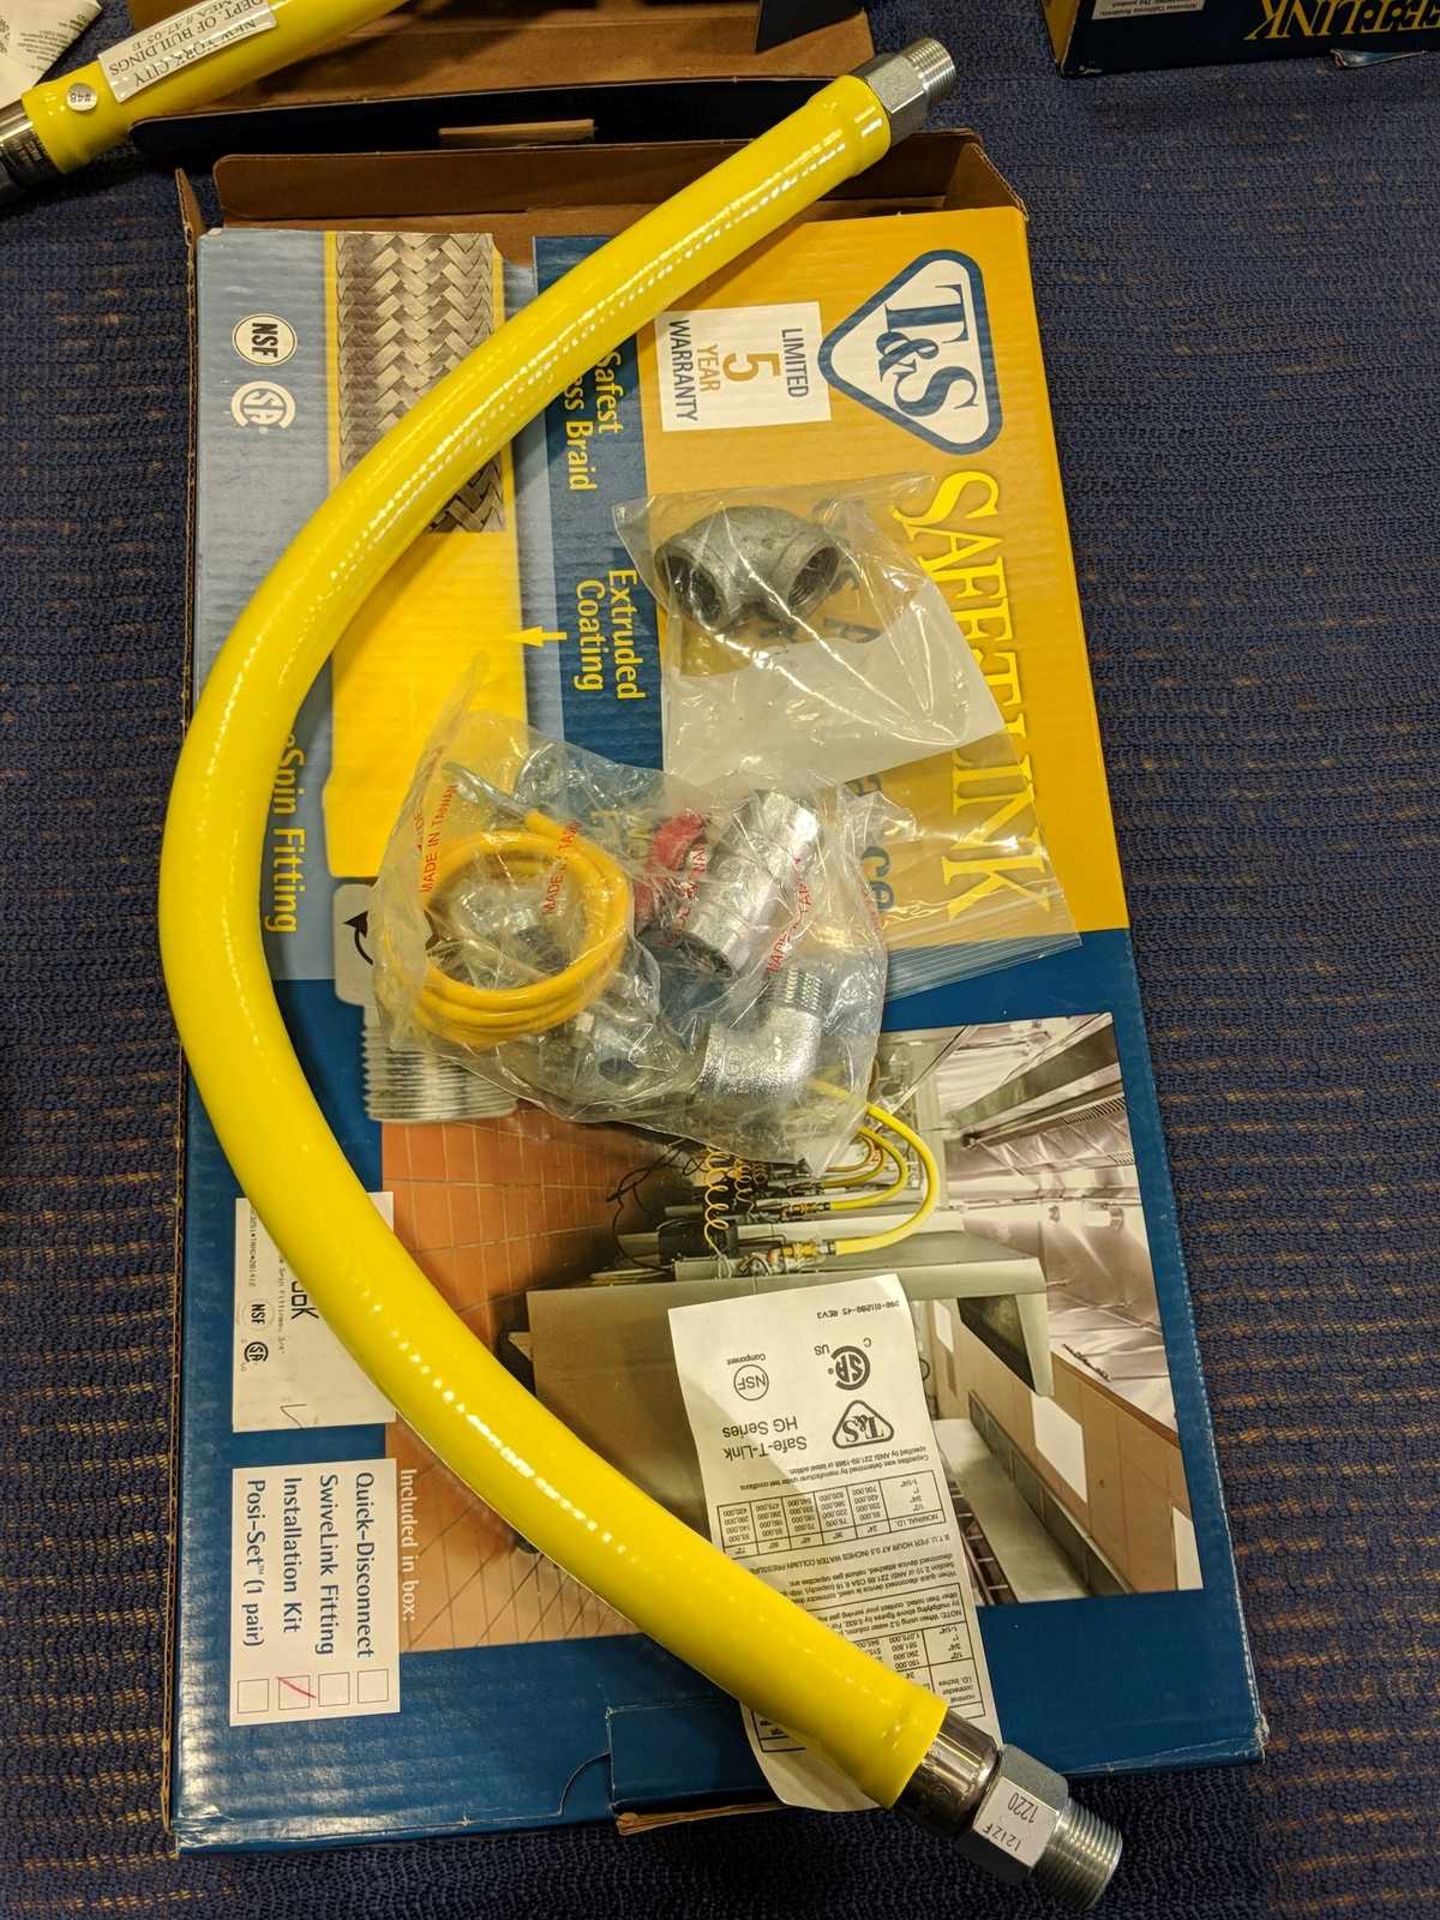 T&S Brass 3/4" NPT 36" Gas Hose and Install Kit, HG-2D-36K - Image 2 of 4